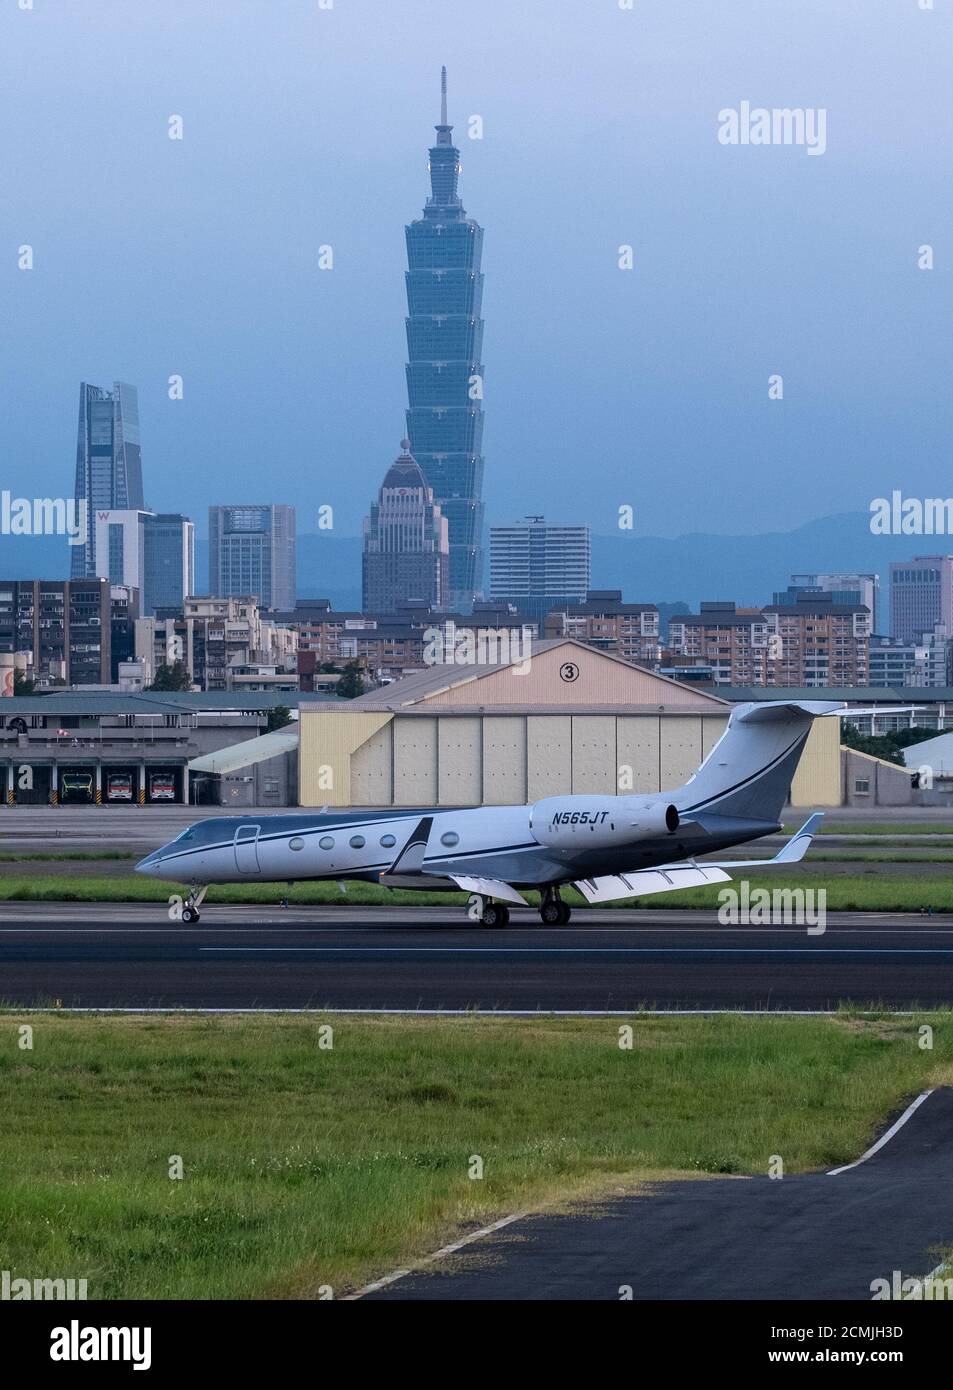 Taipei, Taiwan. 17th Sep, 2020. US. Gulfstream G-V plane carrying the US. Under Secretary for Economic Growth, Energy, and the Environment, Keith J. Krach on board lands at Songshan Airport in Taipei.Keith Krach, a senior member of US President Donald Trump's administration, landed in Taiwan on September 17, 2020, for Washington's highest-level visit since switching diplomatic recognition to China in 1979. Credit: SOPA Images Limited/Alamy Live News Stock Photo